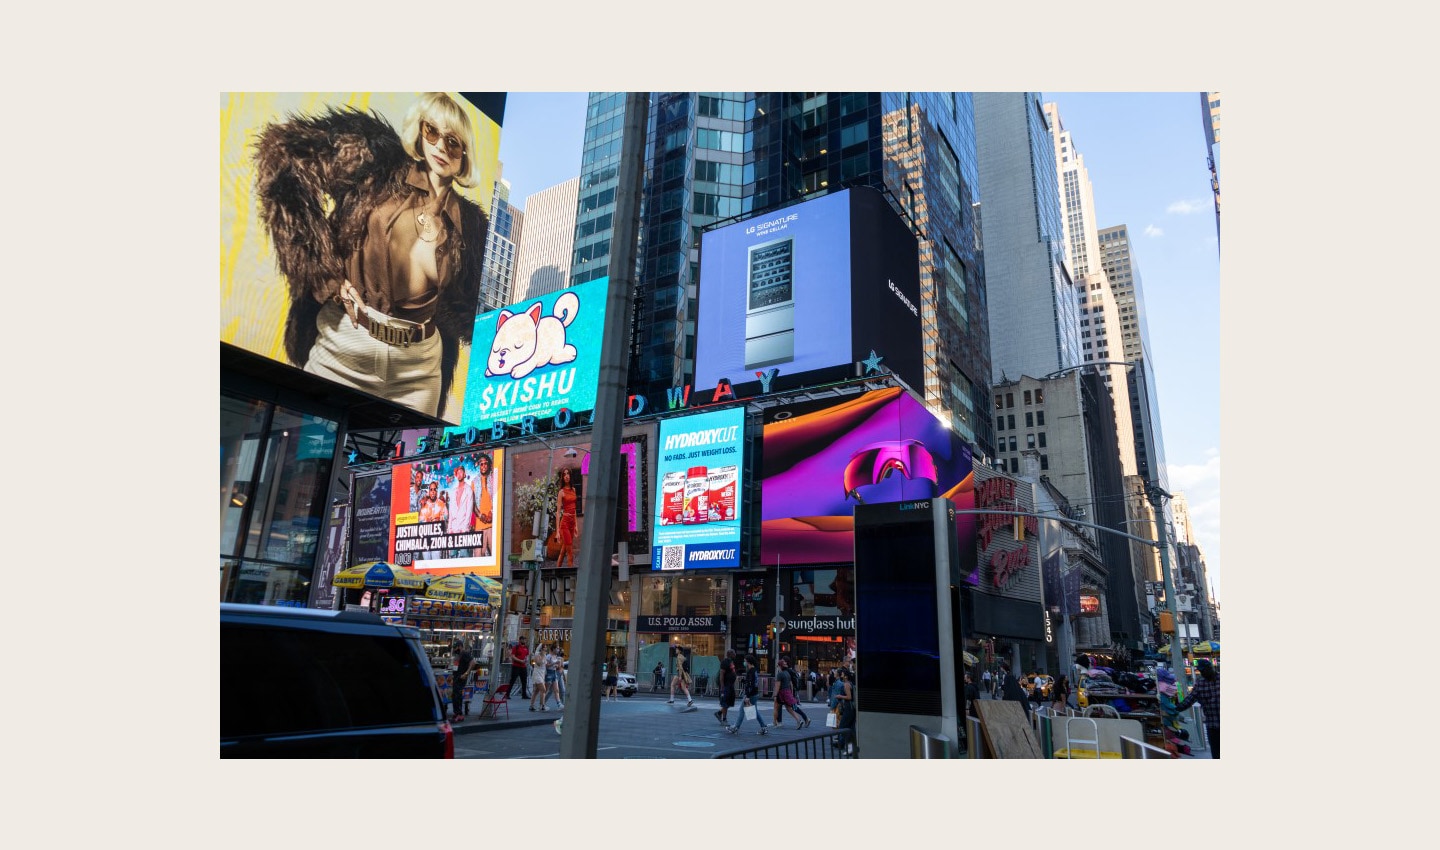 LG's digital billboard in Time Square, New York with an image of LG SIGNATURE Wine Cellar against a purple background